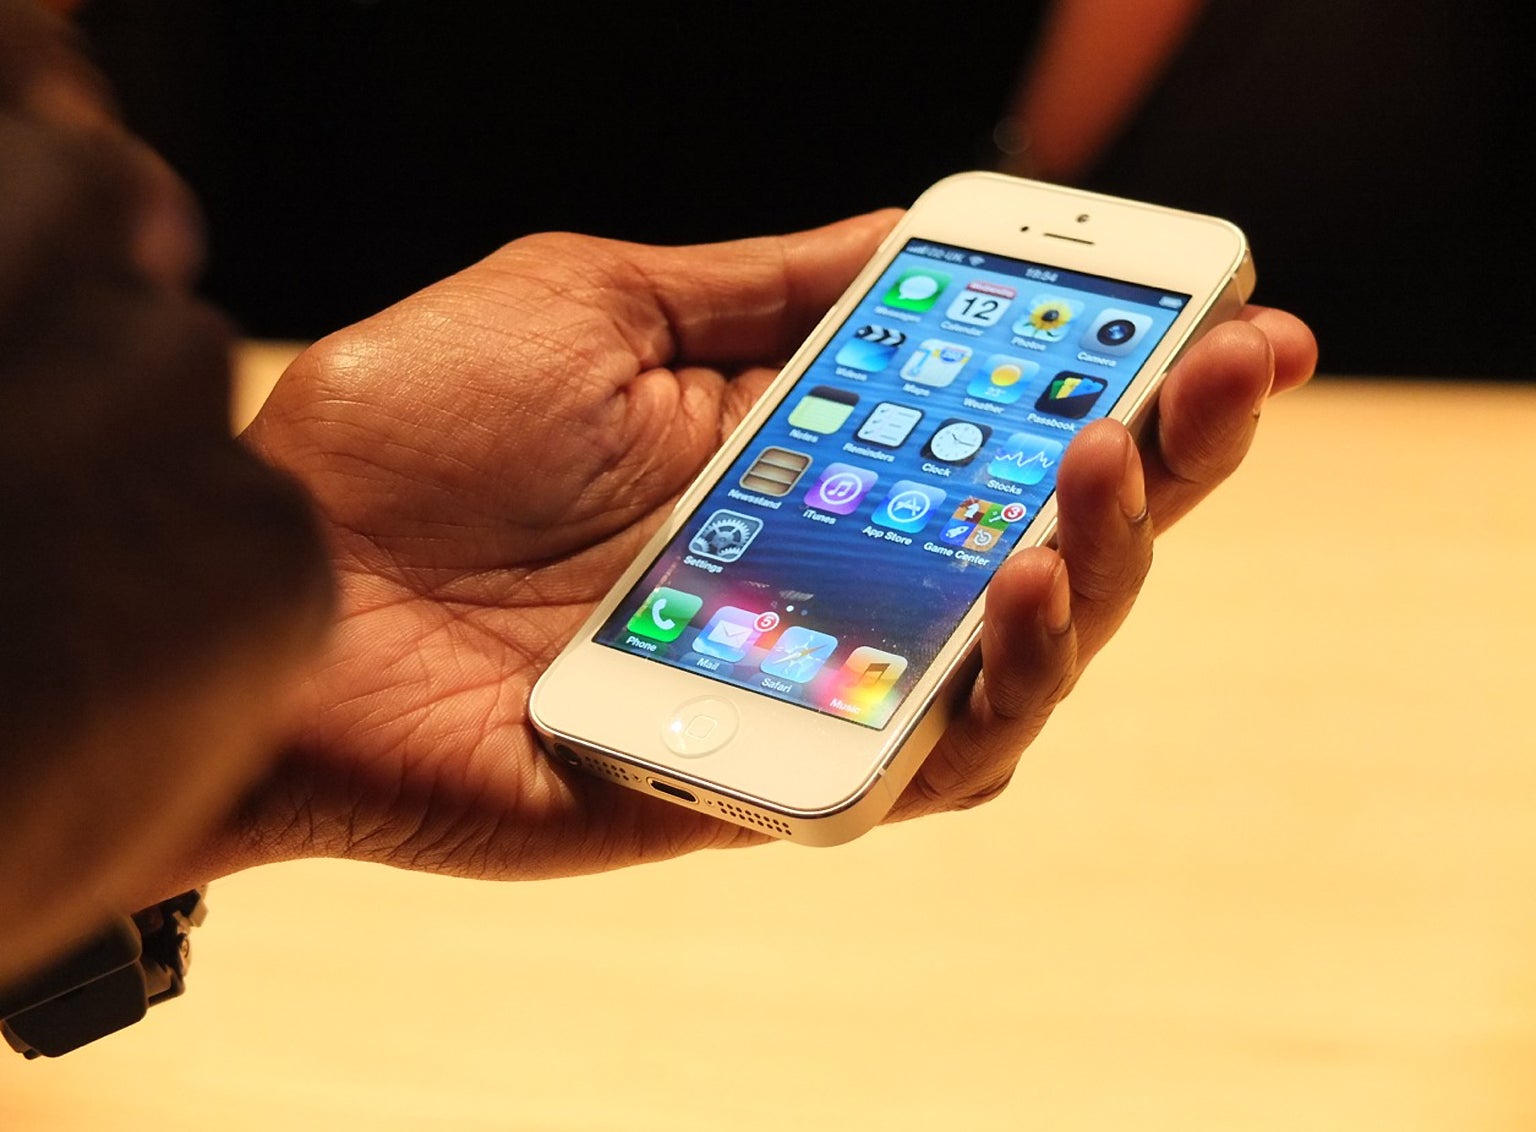 iPhone 5 could lose access to future Apple software updates | The